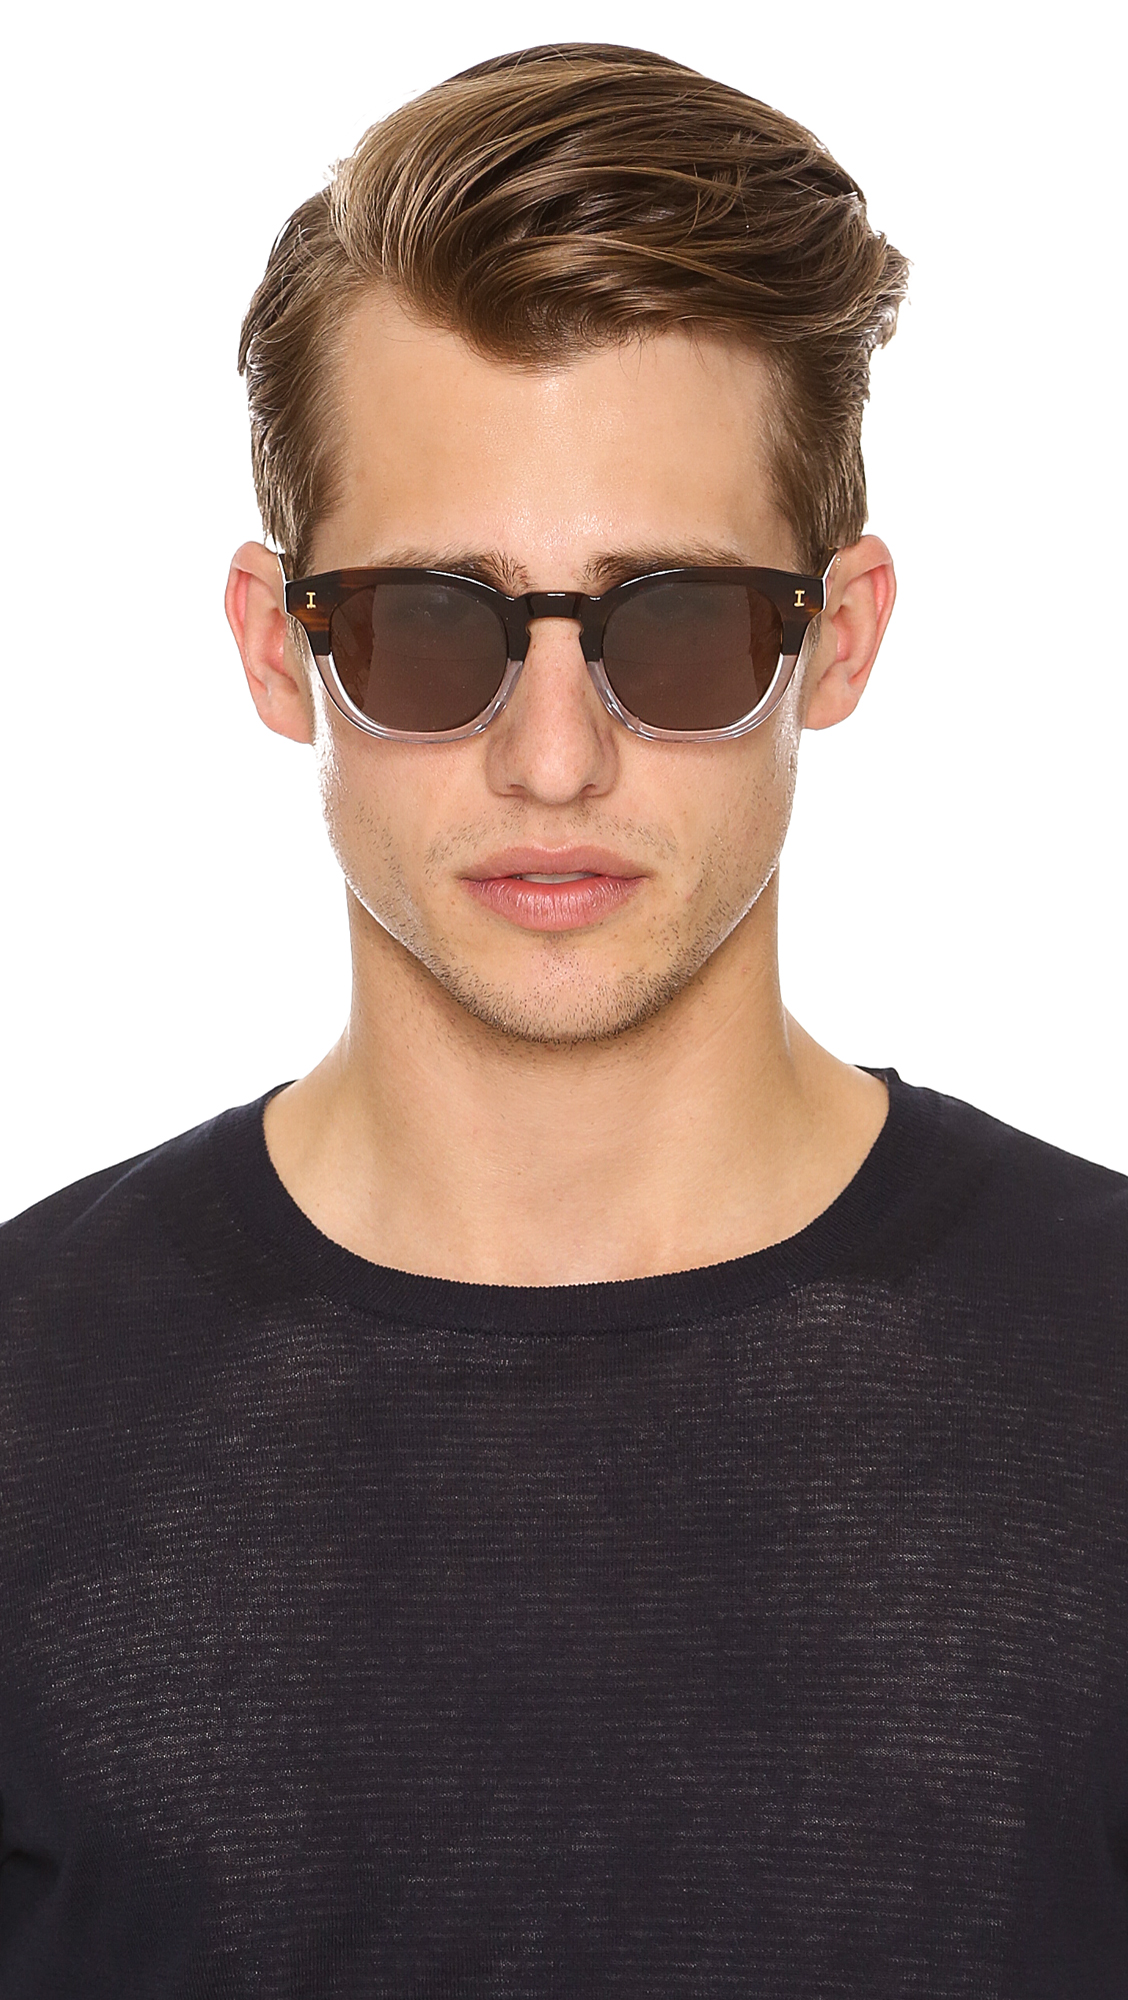 Celebrate National Sunglasses Day with a New Pair – The Fashionisto